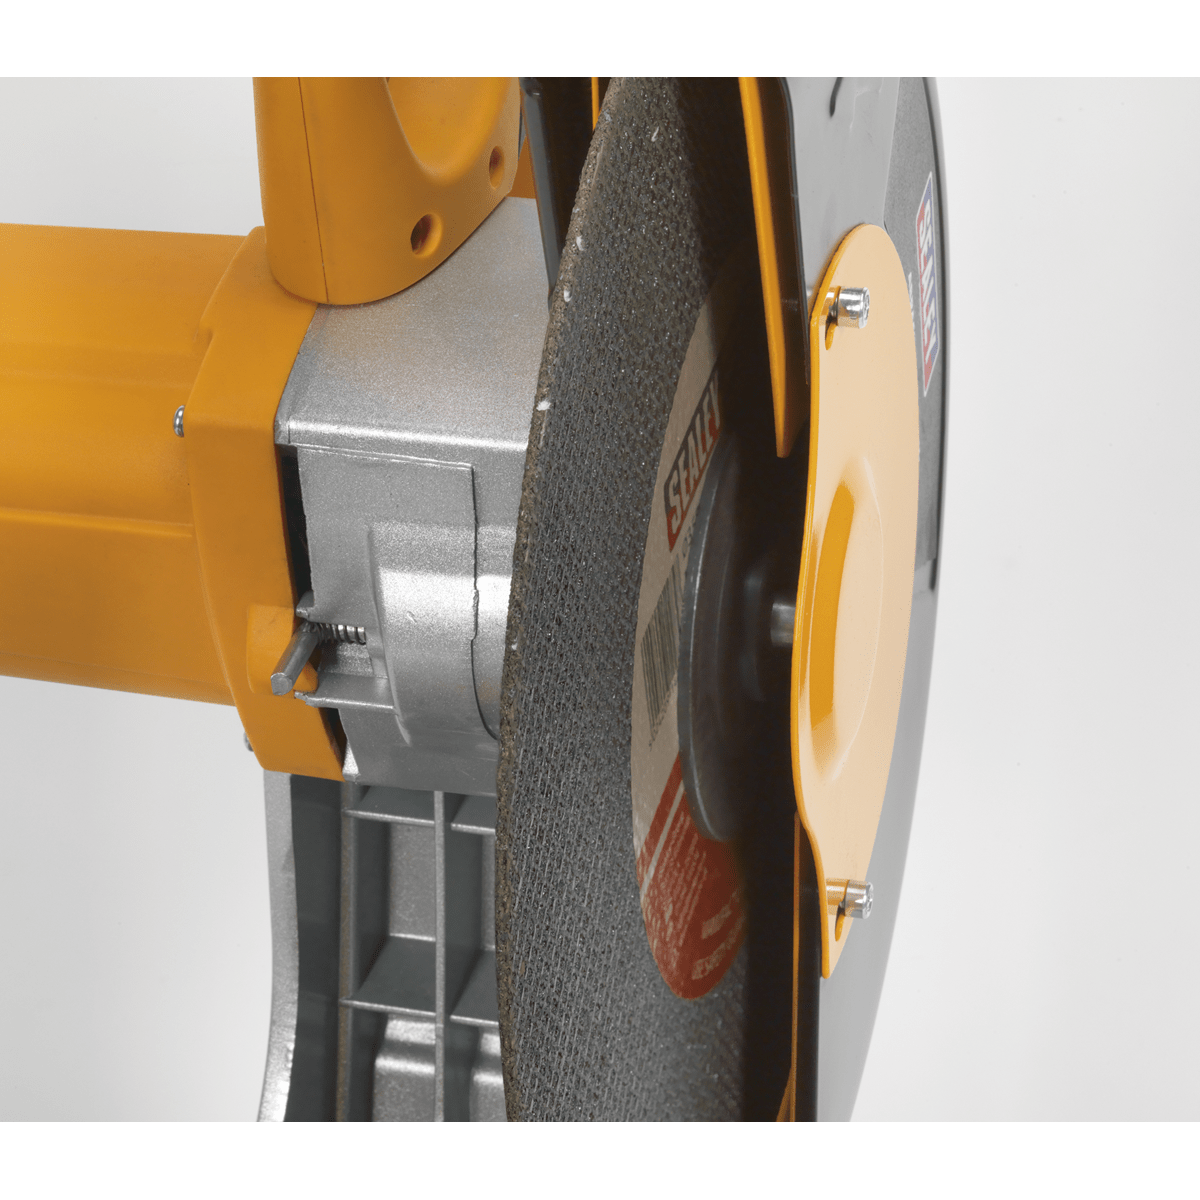 Cut-Off Saw ¯355mm 110V Abrasive Disc Portable | General-purpose cut-off saw suitable for semi-professional use. | toolforce.ie